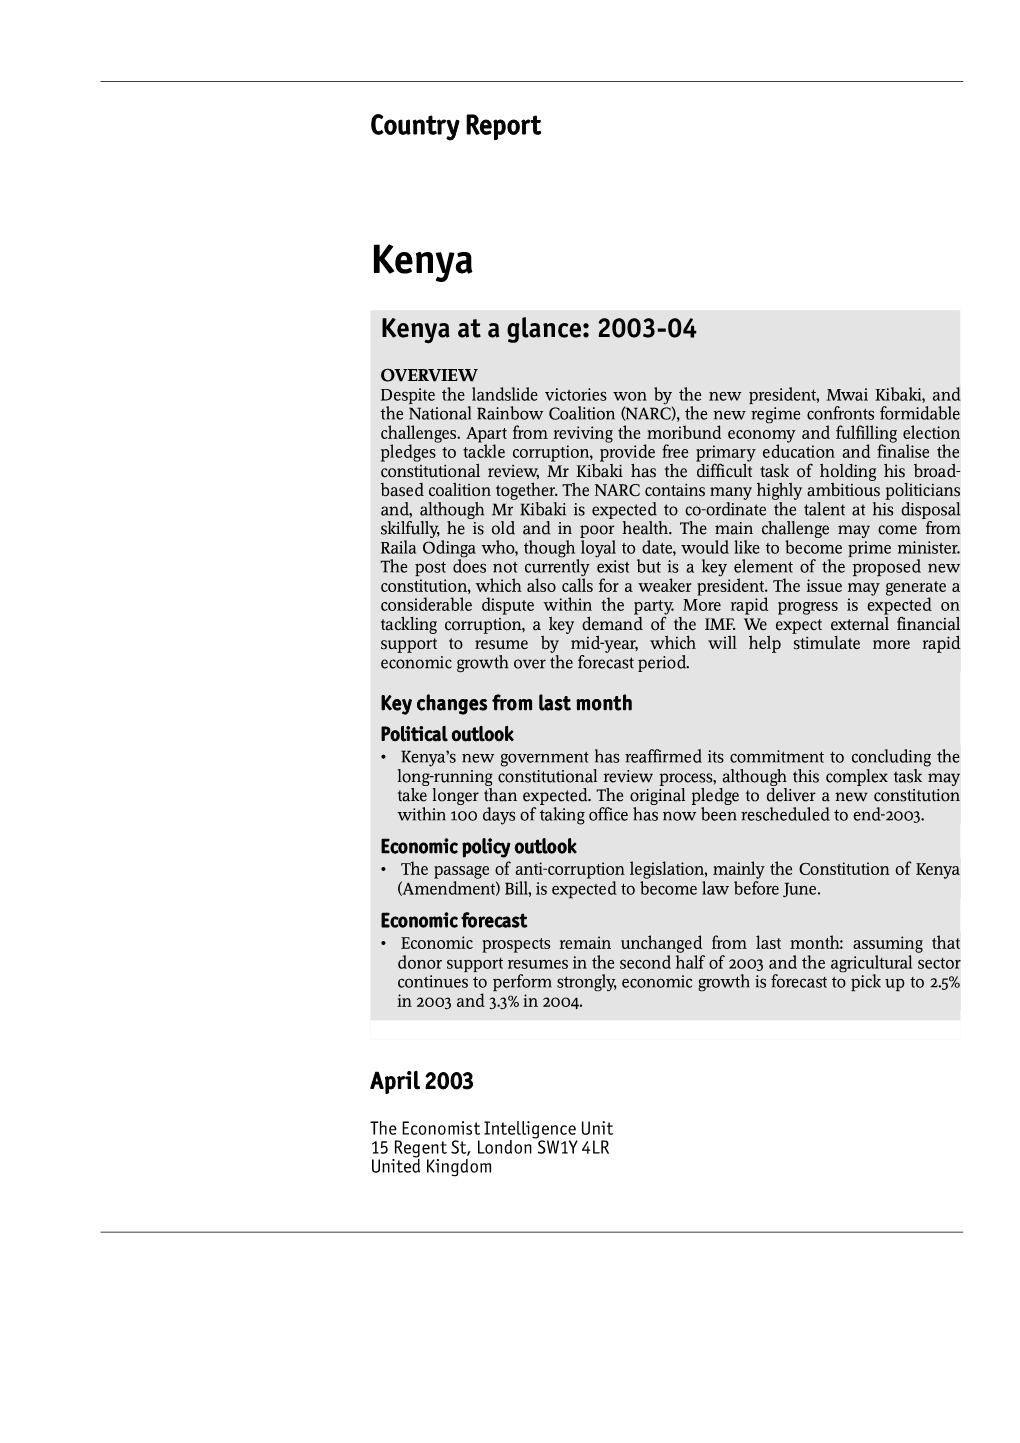 Country Report Kenya at a Glance: 2003-04